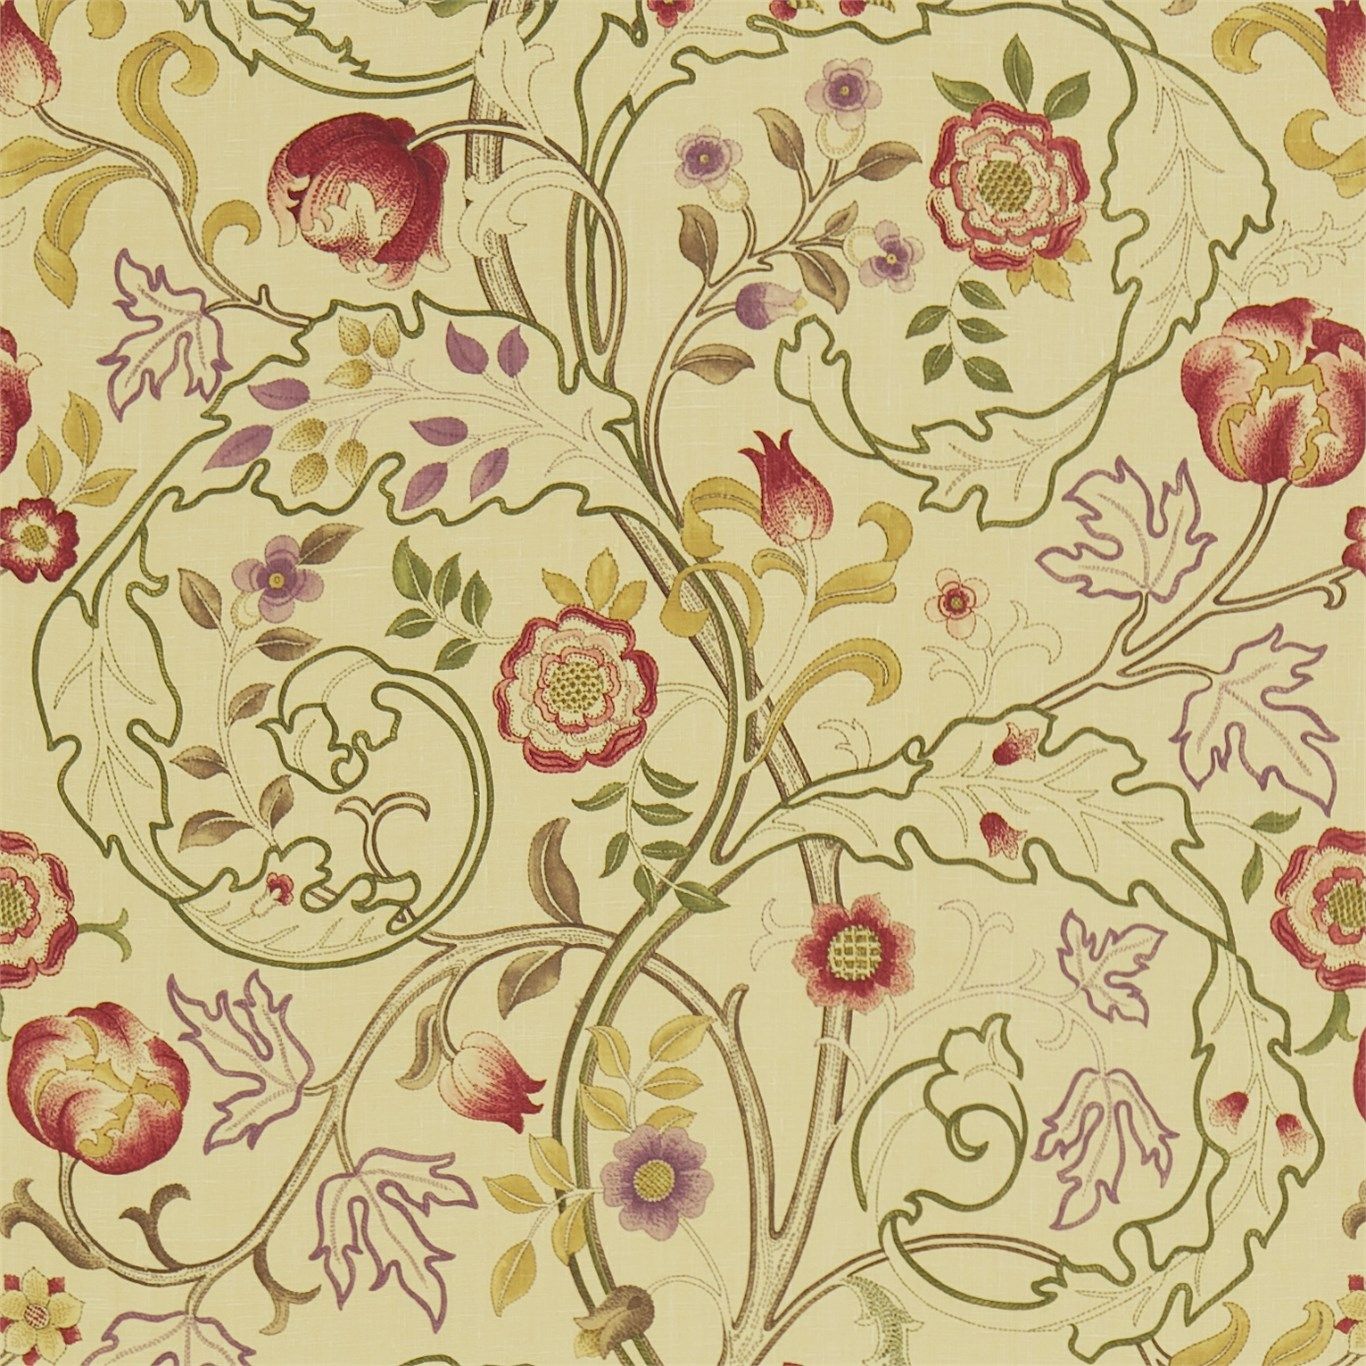 William Morris Embroidery Work , HD Wallpaper & Backgrounds